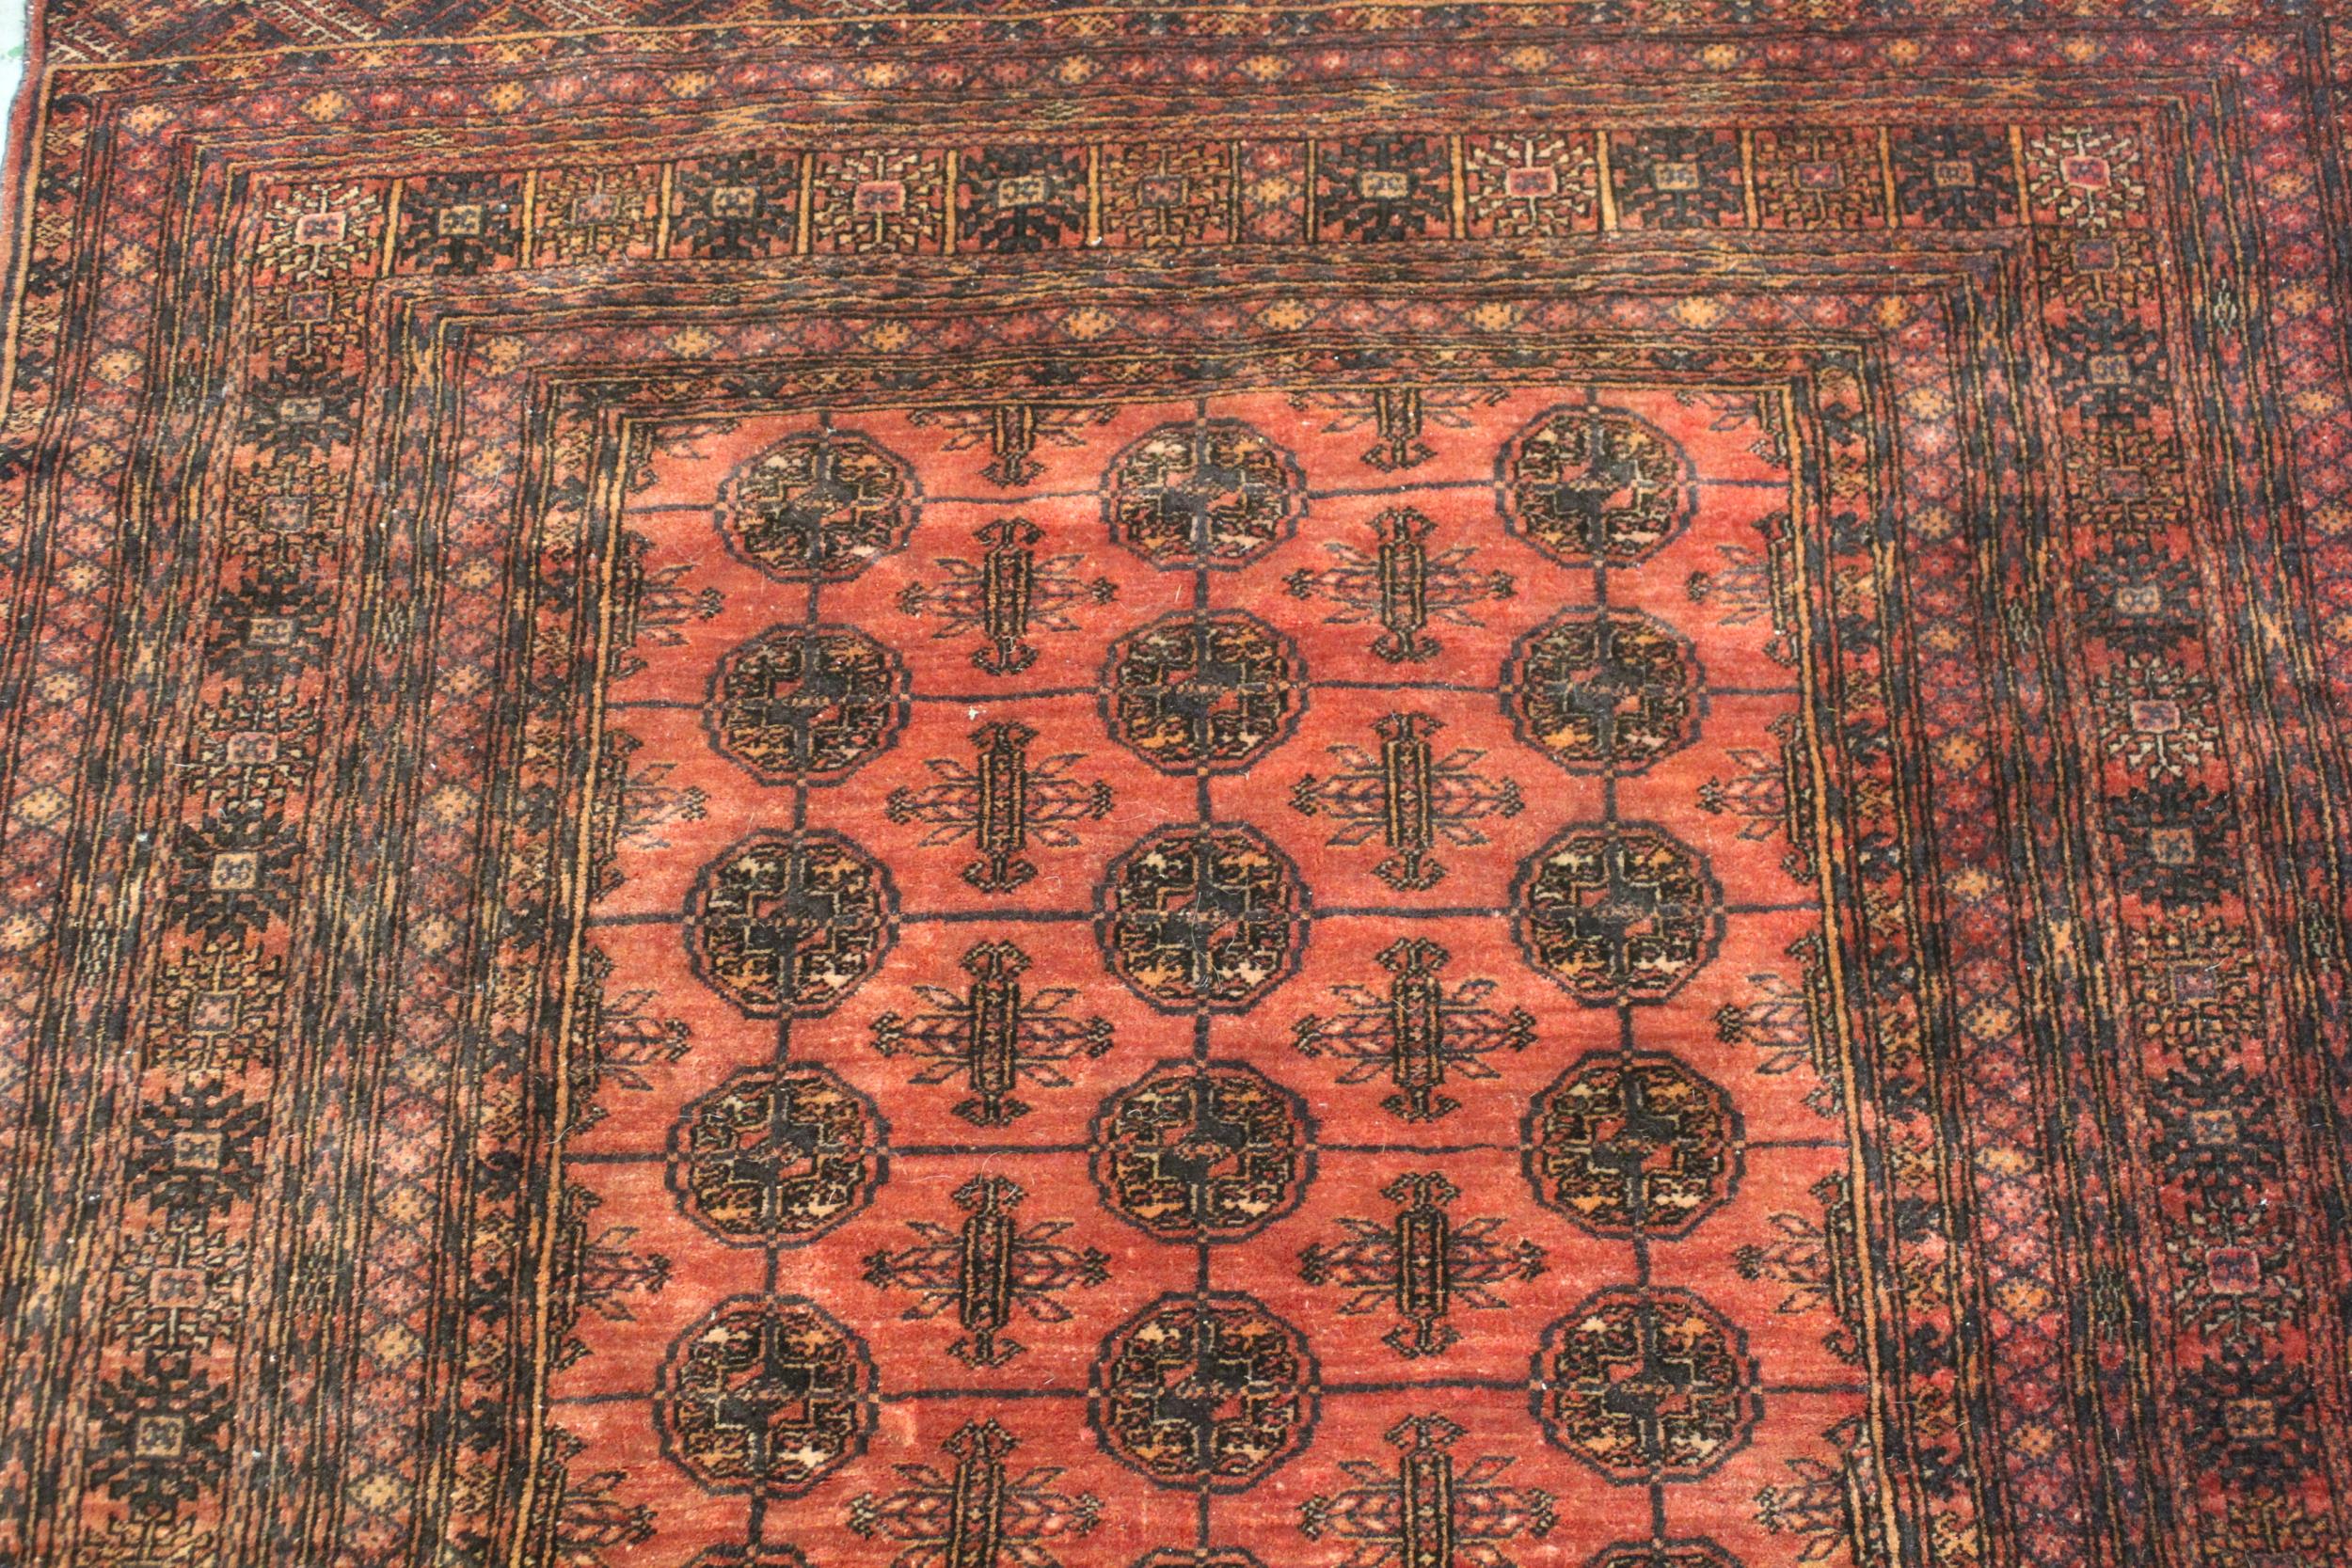 Modern Turkoman rug with three rows of ten gols on a wine ground, with multiple border, 6ft x 4ft - Image 2 of 4